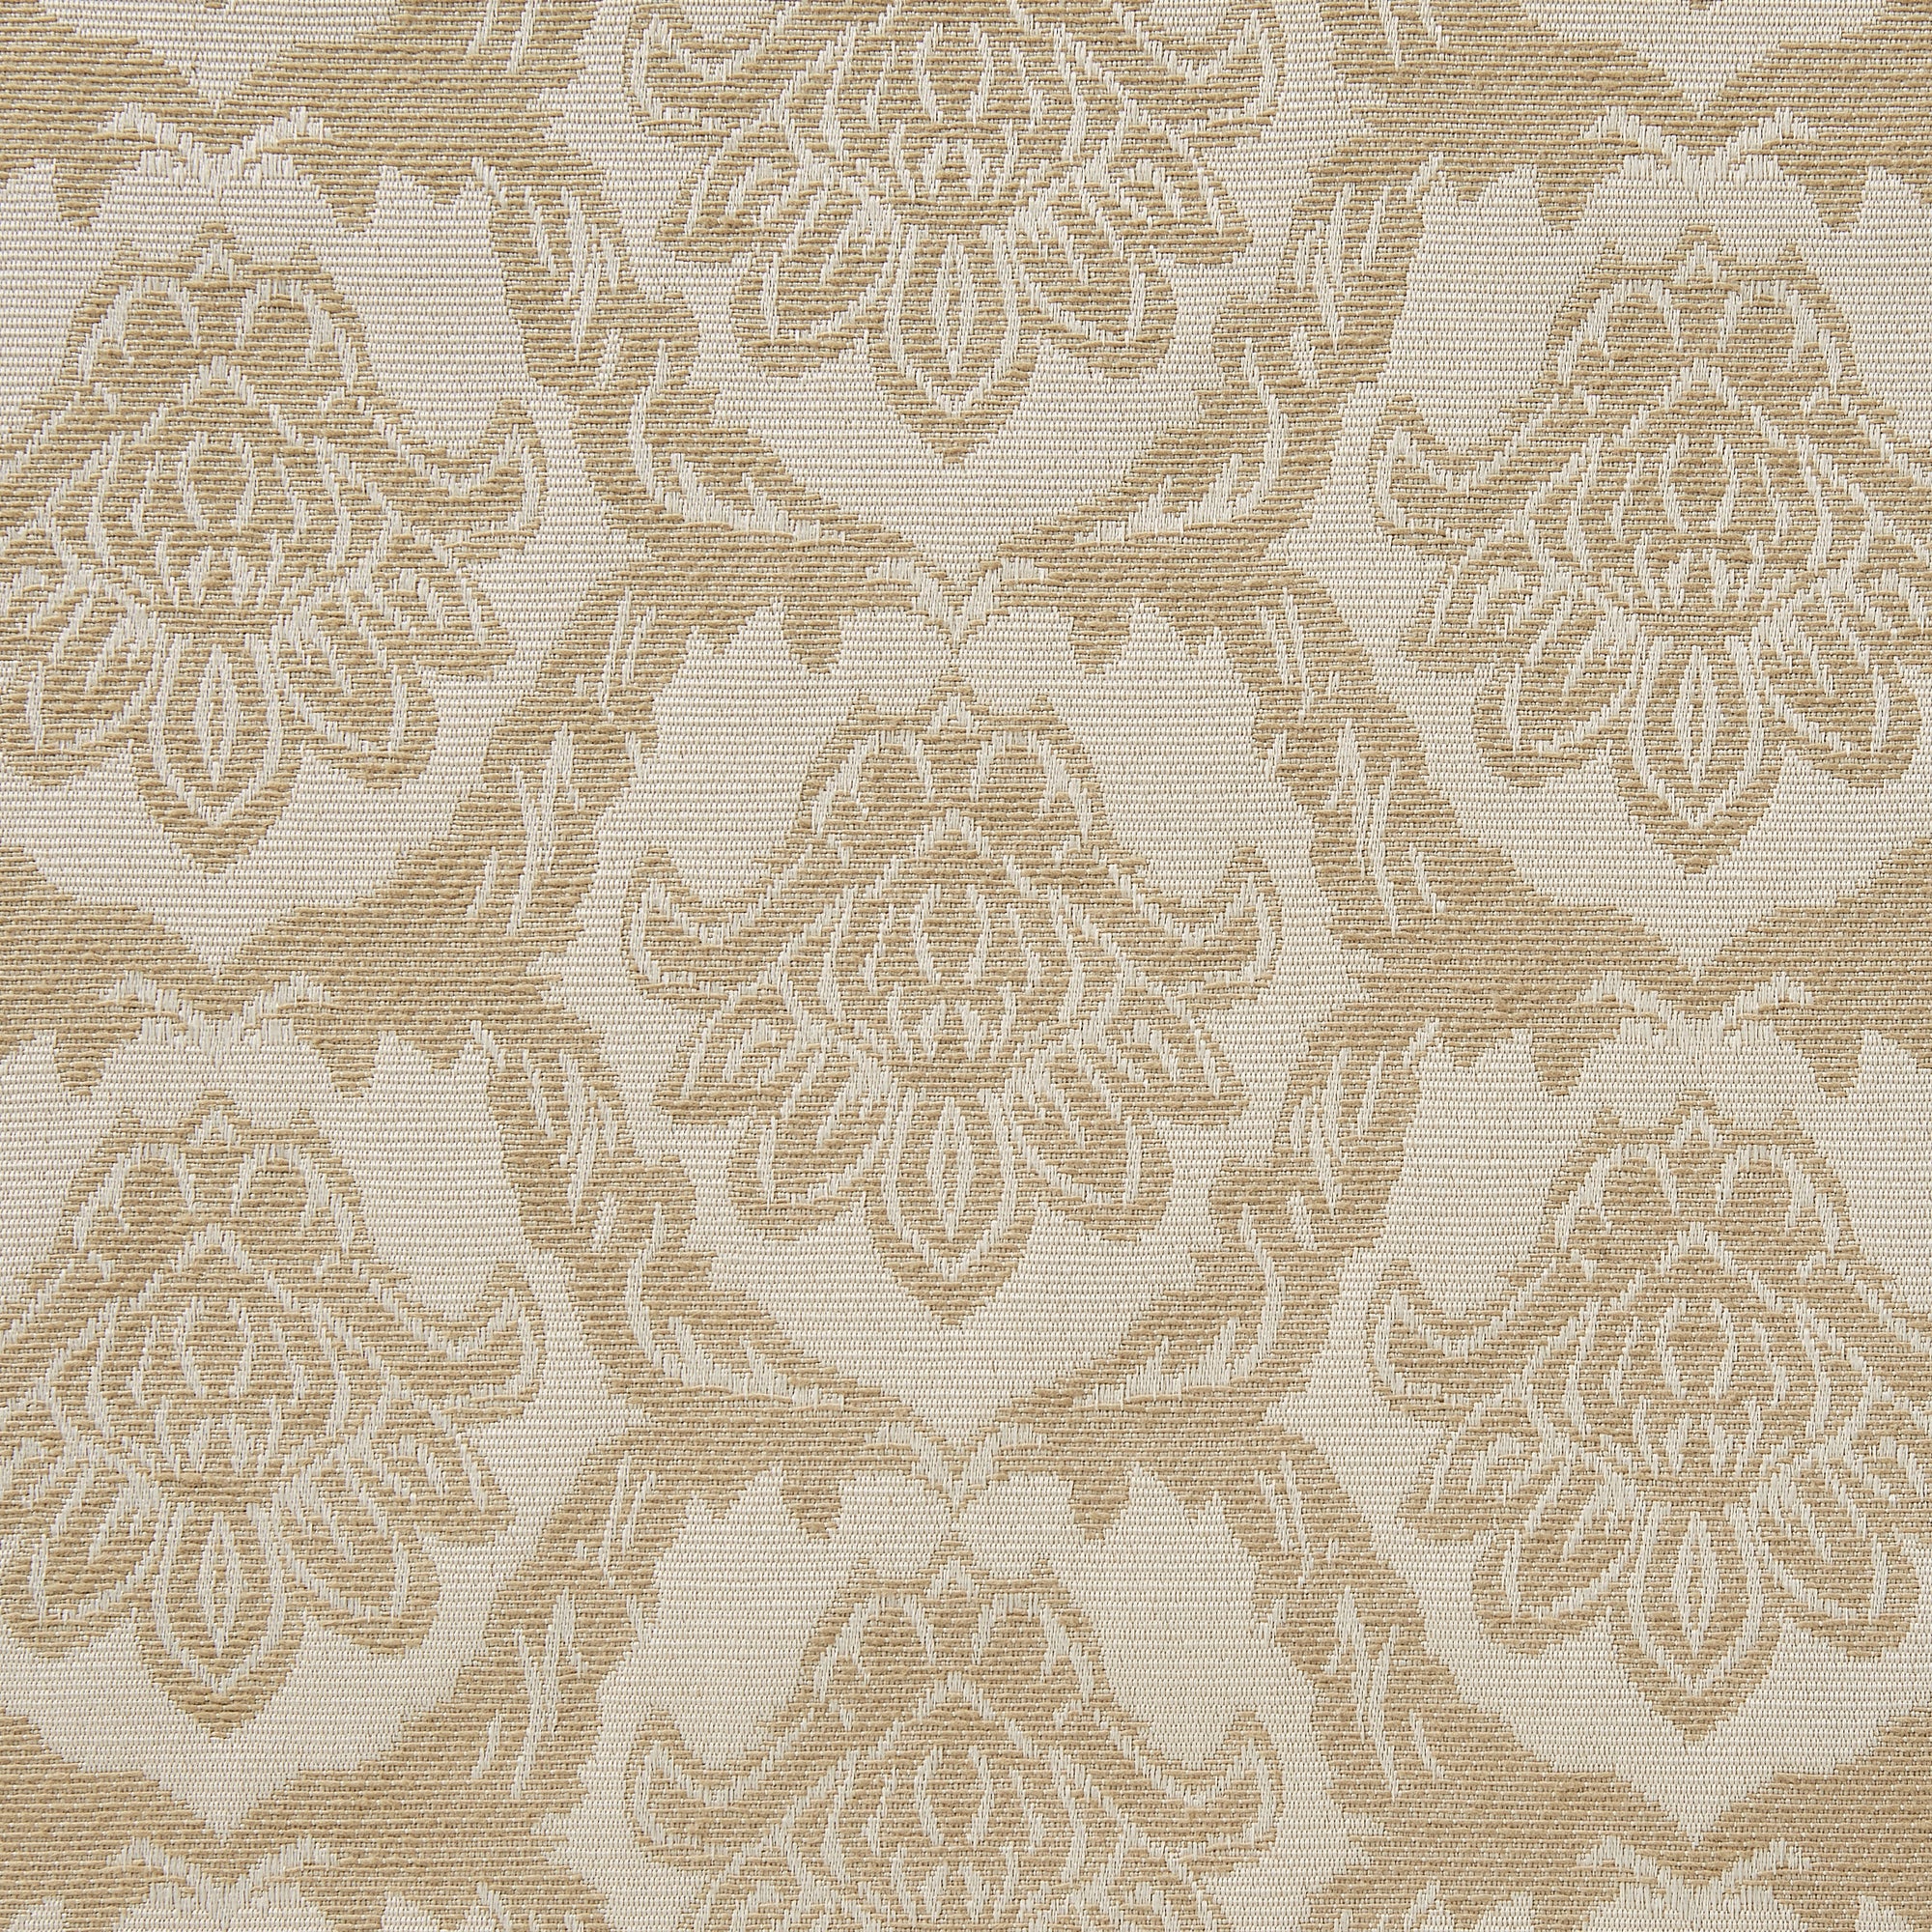 Displaying rattan a beige colored jacquard featuring emblem design on medium weight cotton and polyester blend suitable for suiting